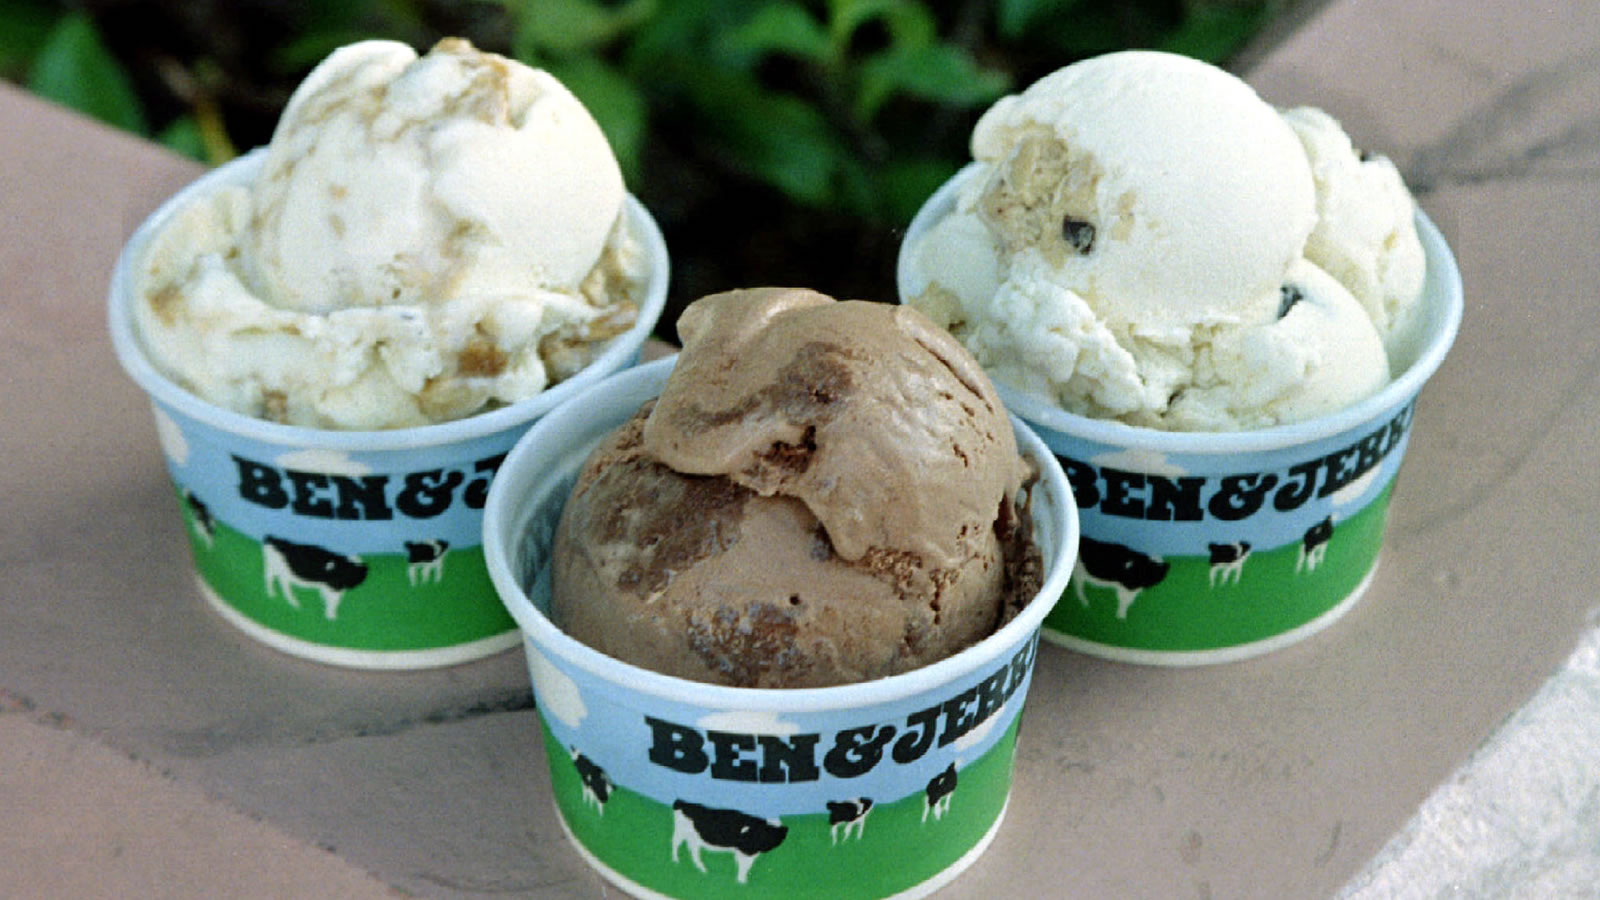 ben-jerry-ice-cream-flavors-online-food-blog-national-review